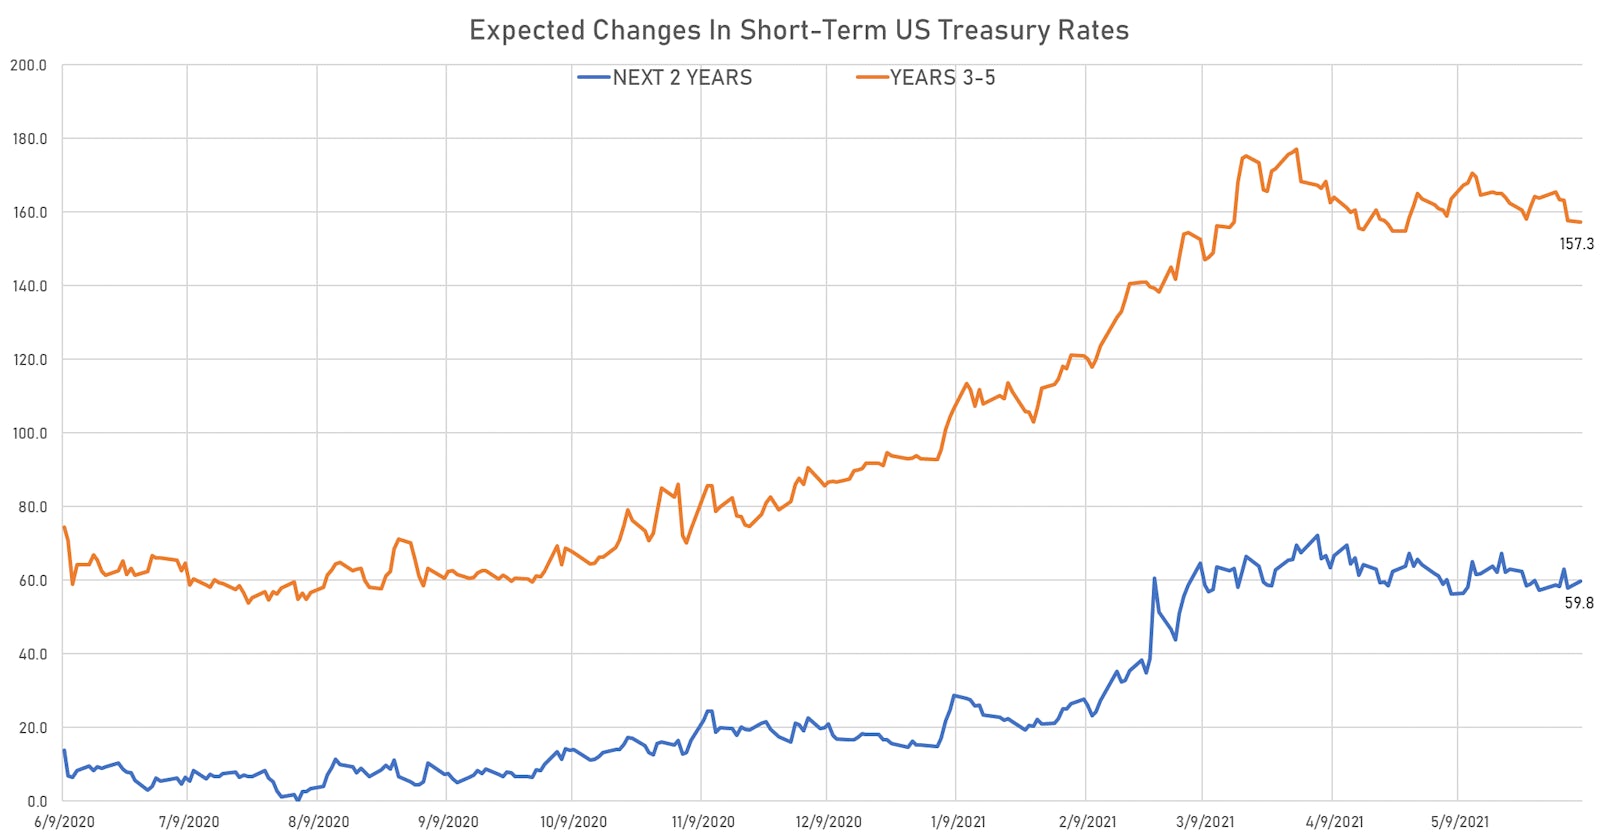 Expected US rate hikes in the next 5 years | Sources: ϕpost, Refinitiv data